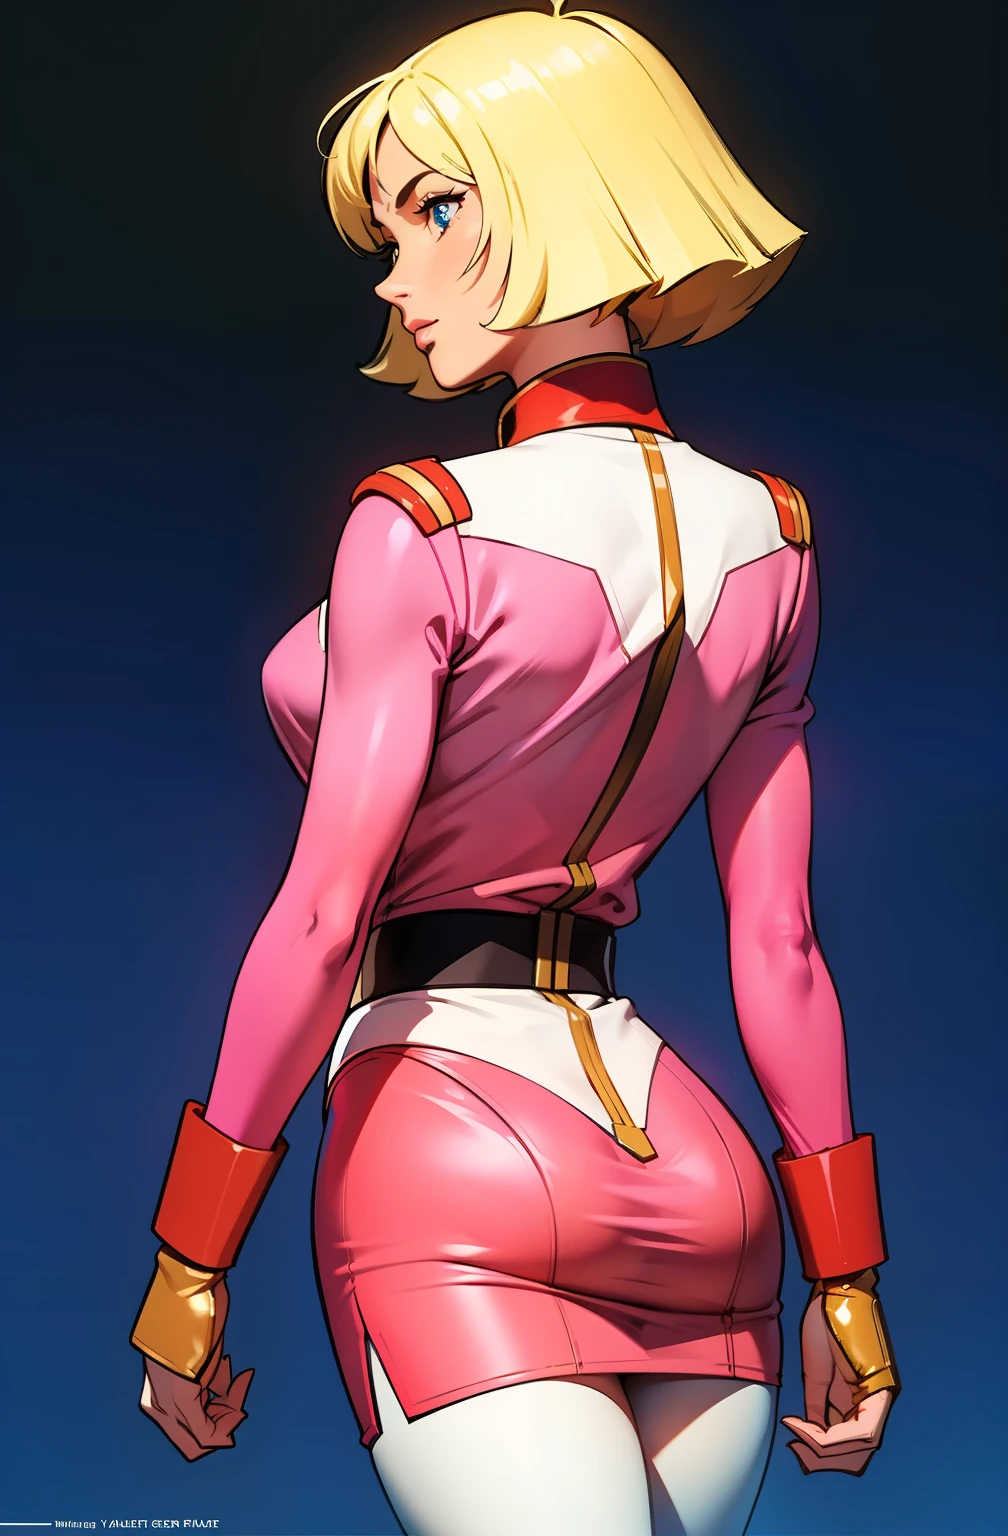 ((masterpiece)), ((cinematic lighting)), realistic photo、Real Images、Top image quality、1girl in, sayla mass, Elegant, masterpiece, Convoluted, slim arms, wide hips, thick thighs, thigh gaps, Best Quality, absurderes, high face detail, Perfect eyes, mature, Cowboy Shot, , Vibrant colors, soft pink uniform, soft pink Skirt, white tights, side view